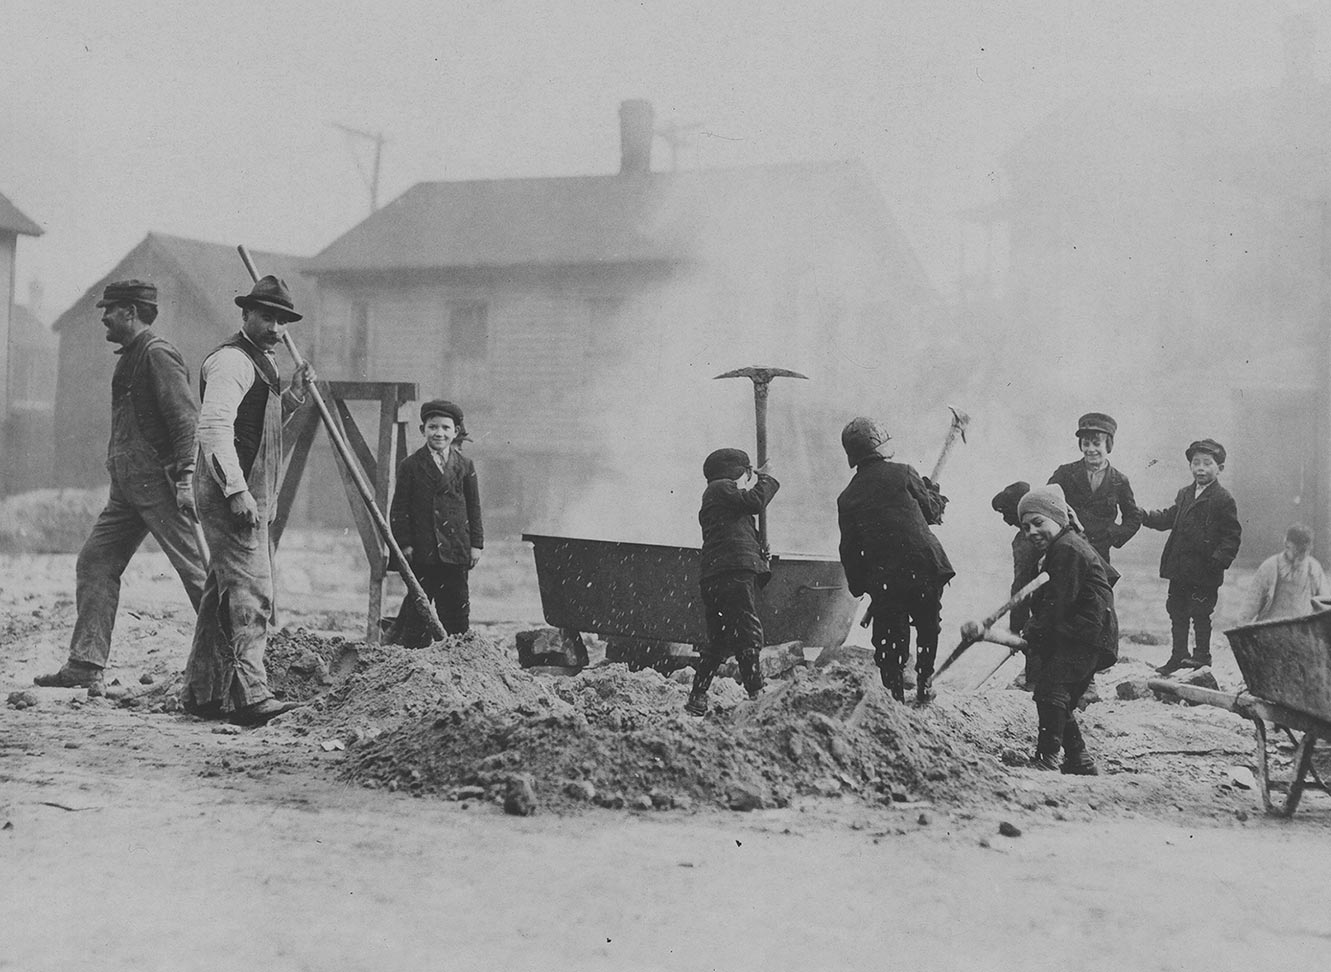 Children digging with pick axes on a Chicago street; Chicago, IL. Source: ICHi-52108. Chicago History Museum. Reproduction of photographic print, photographer unknown.